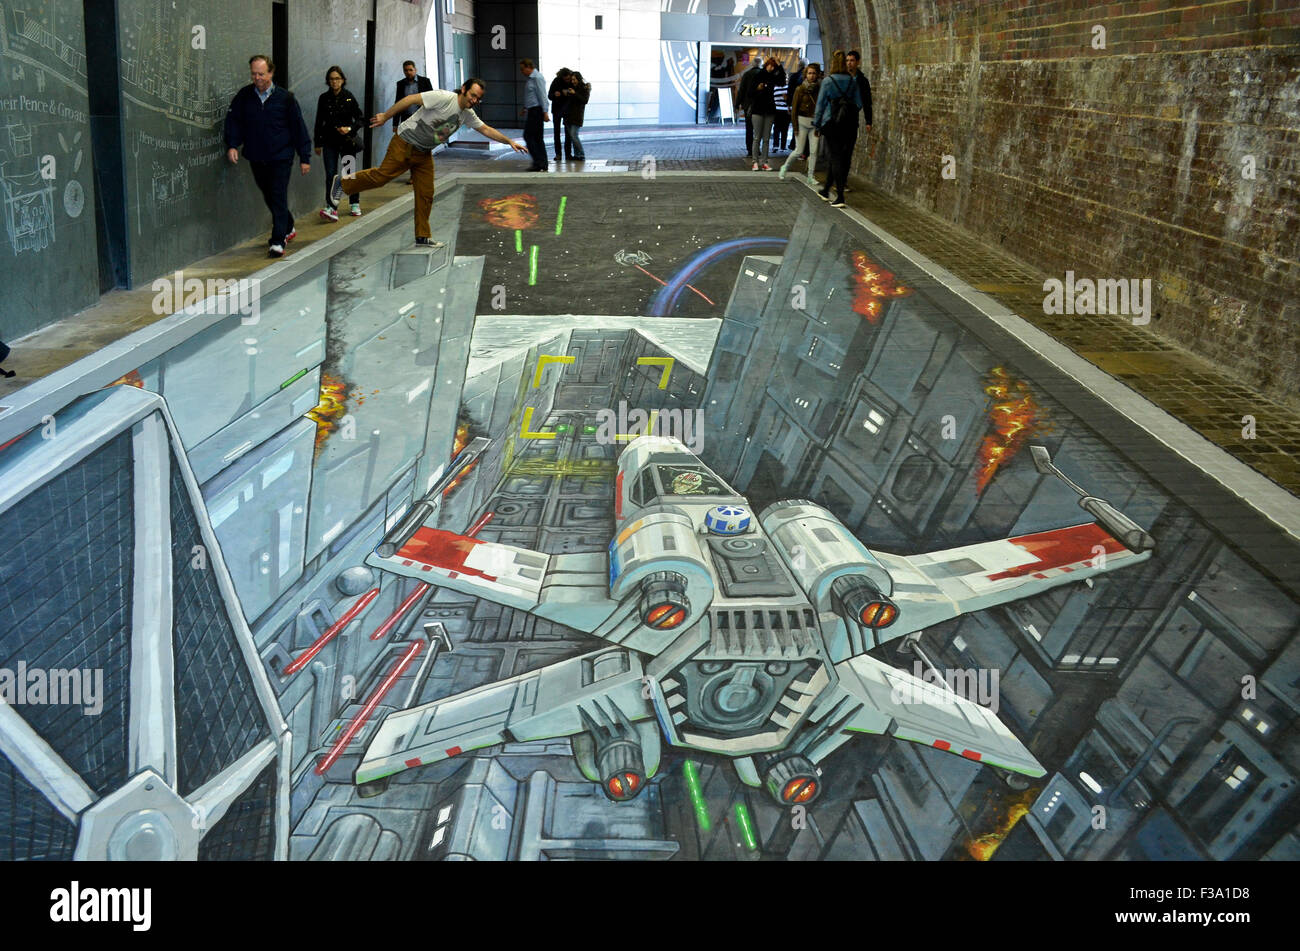 A 3-D Star Wars painting by Joe and Max which appeared in the pedestrian tunnel under Southwark Bridge, London, 1st-2nd October 2015, to coincide with the UK release of the Rise Against The Empire play set. The painting, which was 49 feet (15 metres) long, has both bemused wregular commuters and drawn crowds of tourists keen to see it throughout the two days, and shows the attack on the Death Star by Luke Skywalker's X-Wing with an Imperial TIE Fighter in pursuit to the left. Credit:  Antony Nettle/Alamy Live News Stock Photo